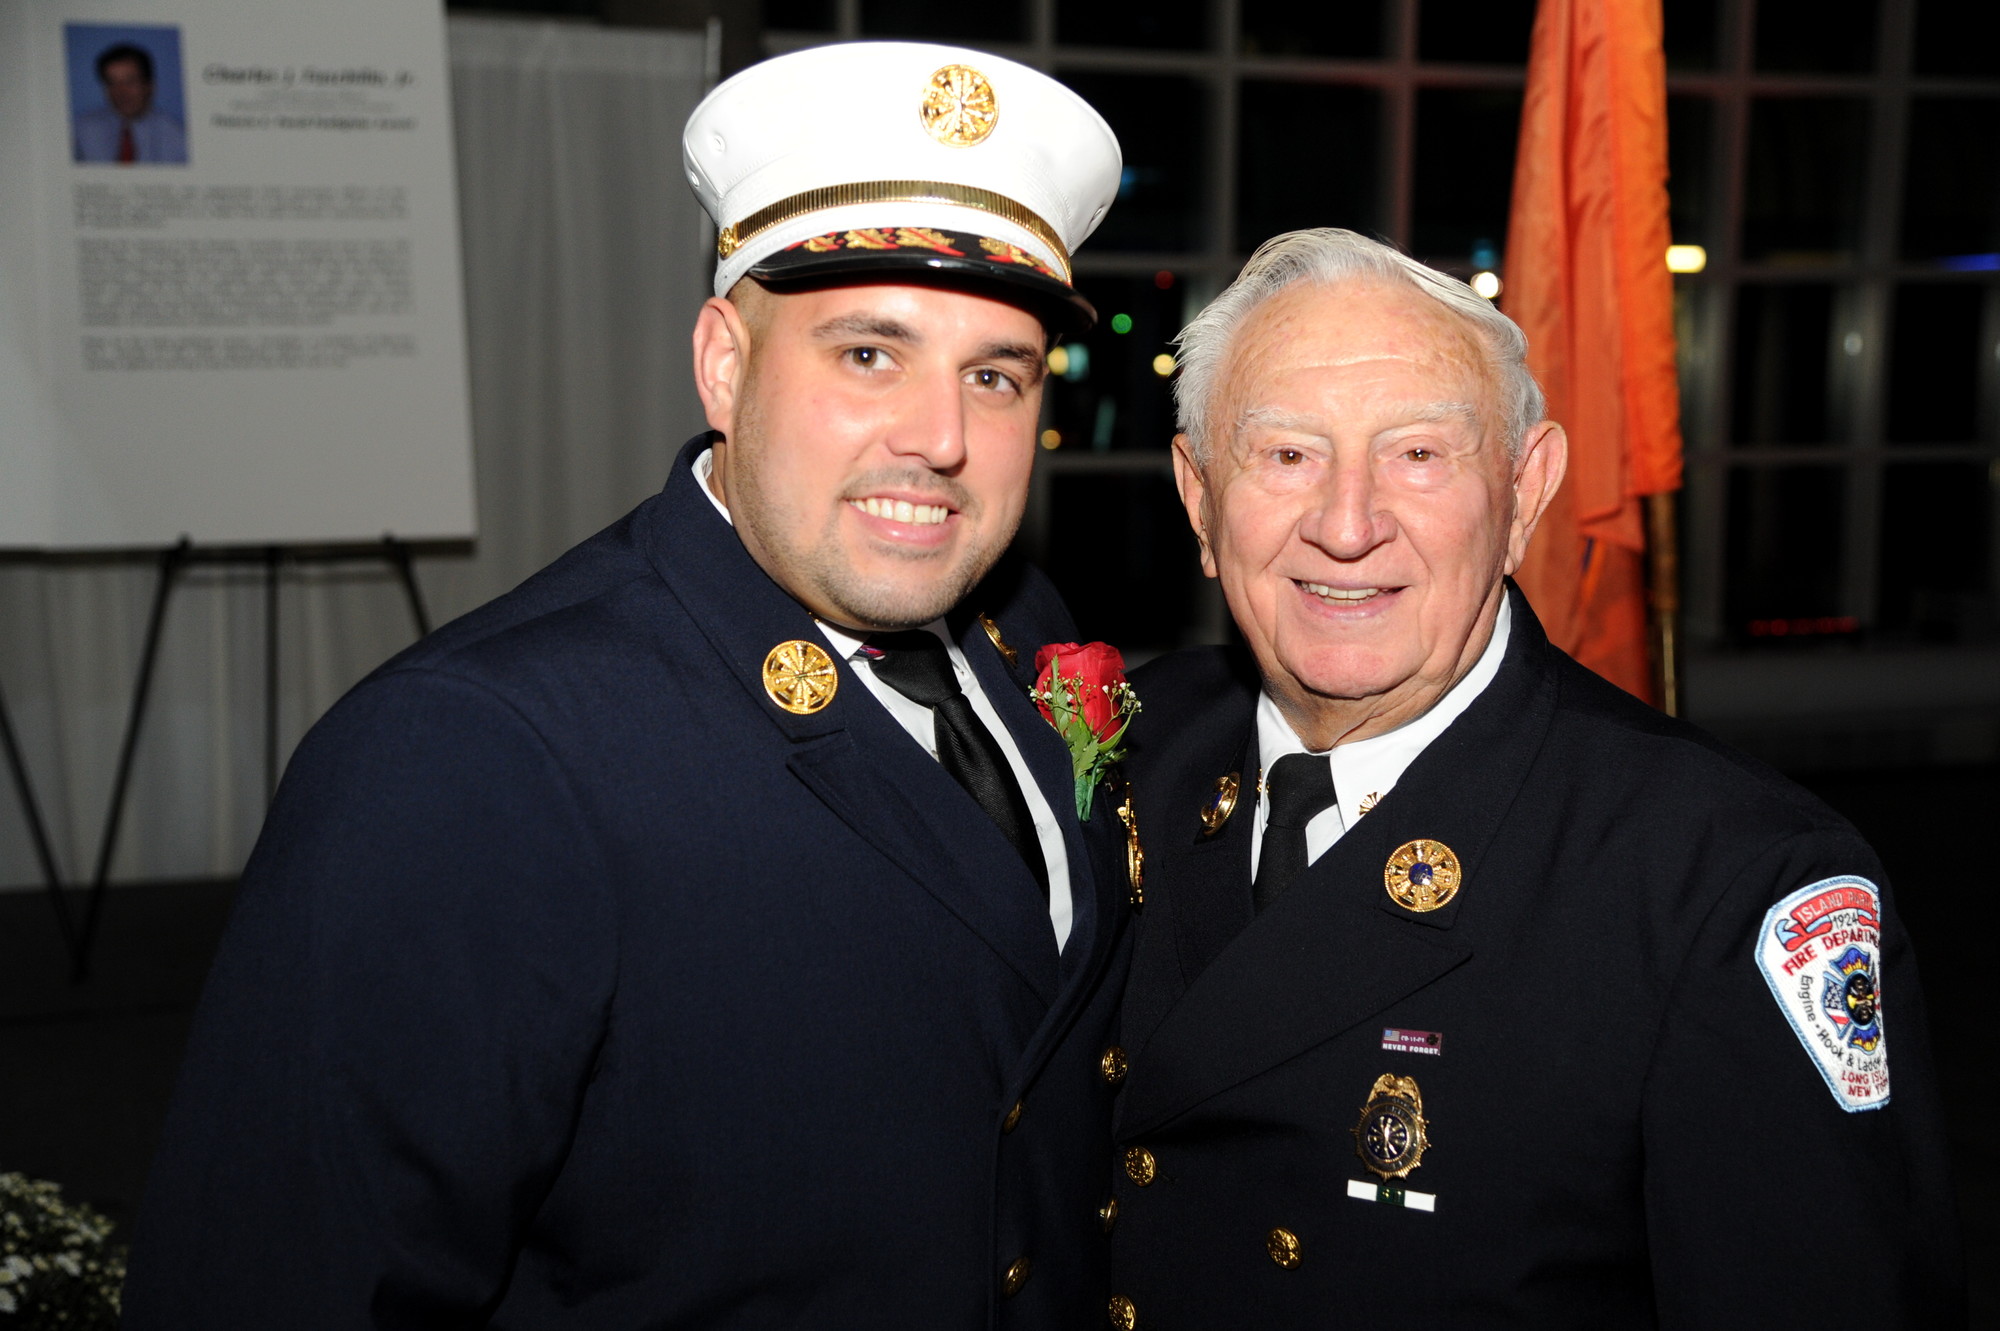 Island Park Fire Chief Anthony D’Esposito, left, with ex-chief Ed McGann, who served in the department for 67 years, at the Nassau County Firefighters Museum and Education Center awards dinner on Oct. 11.